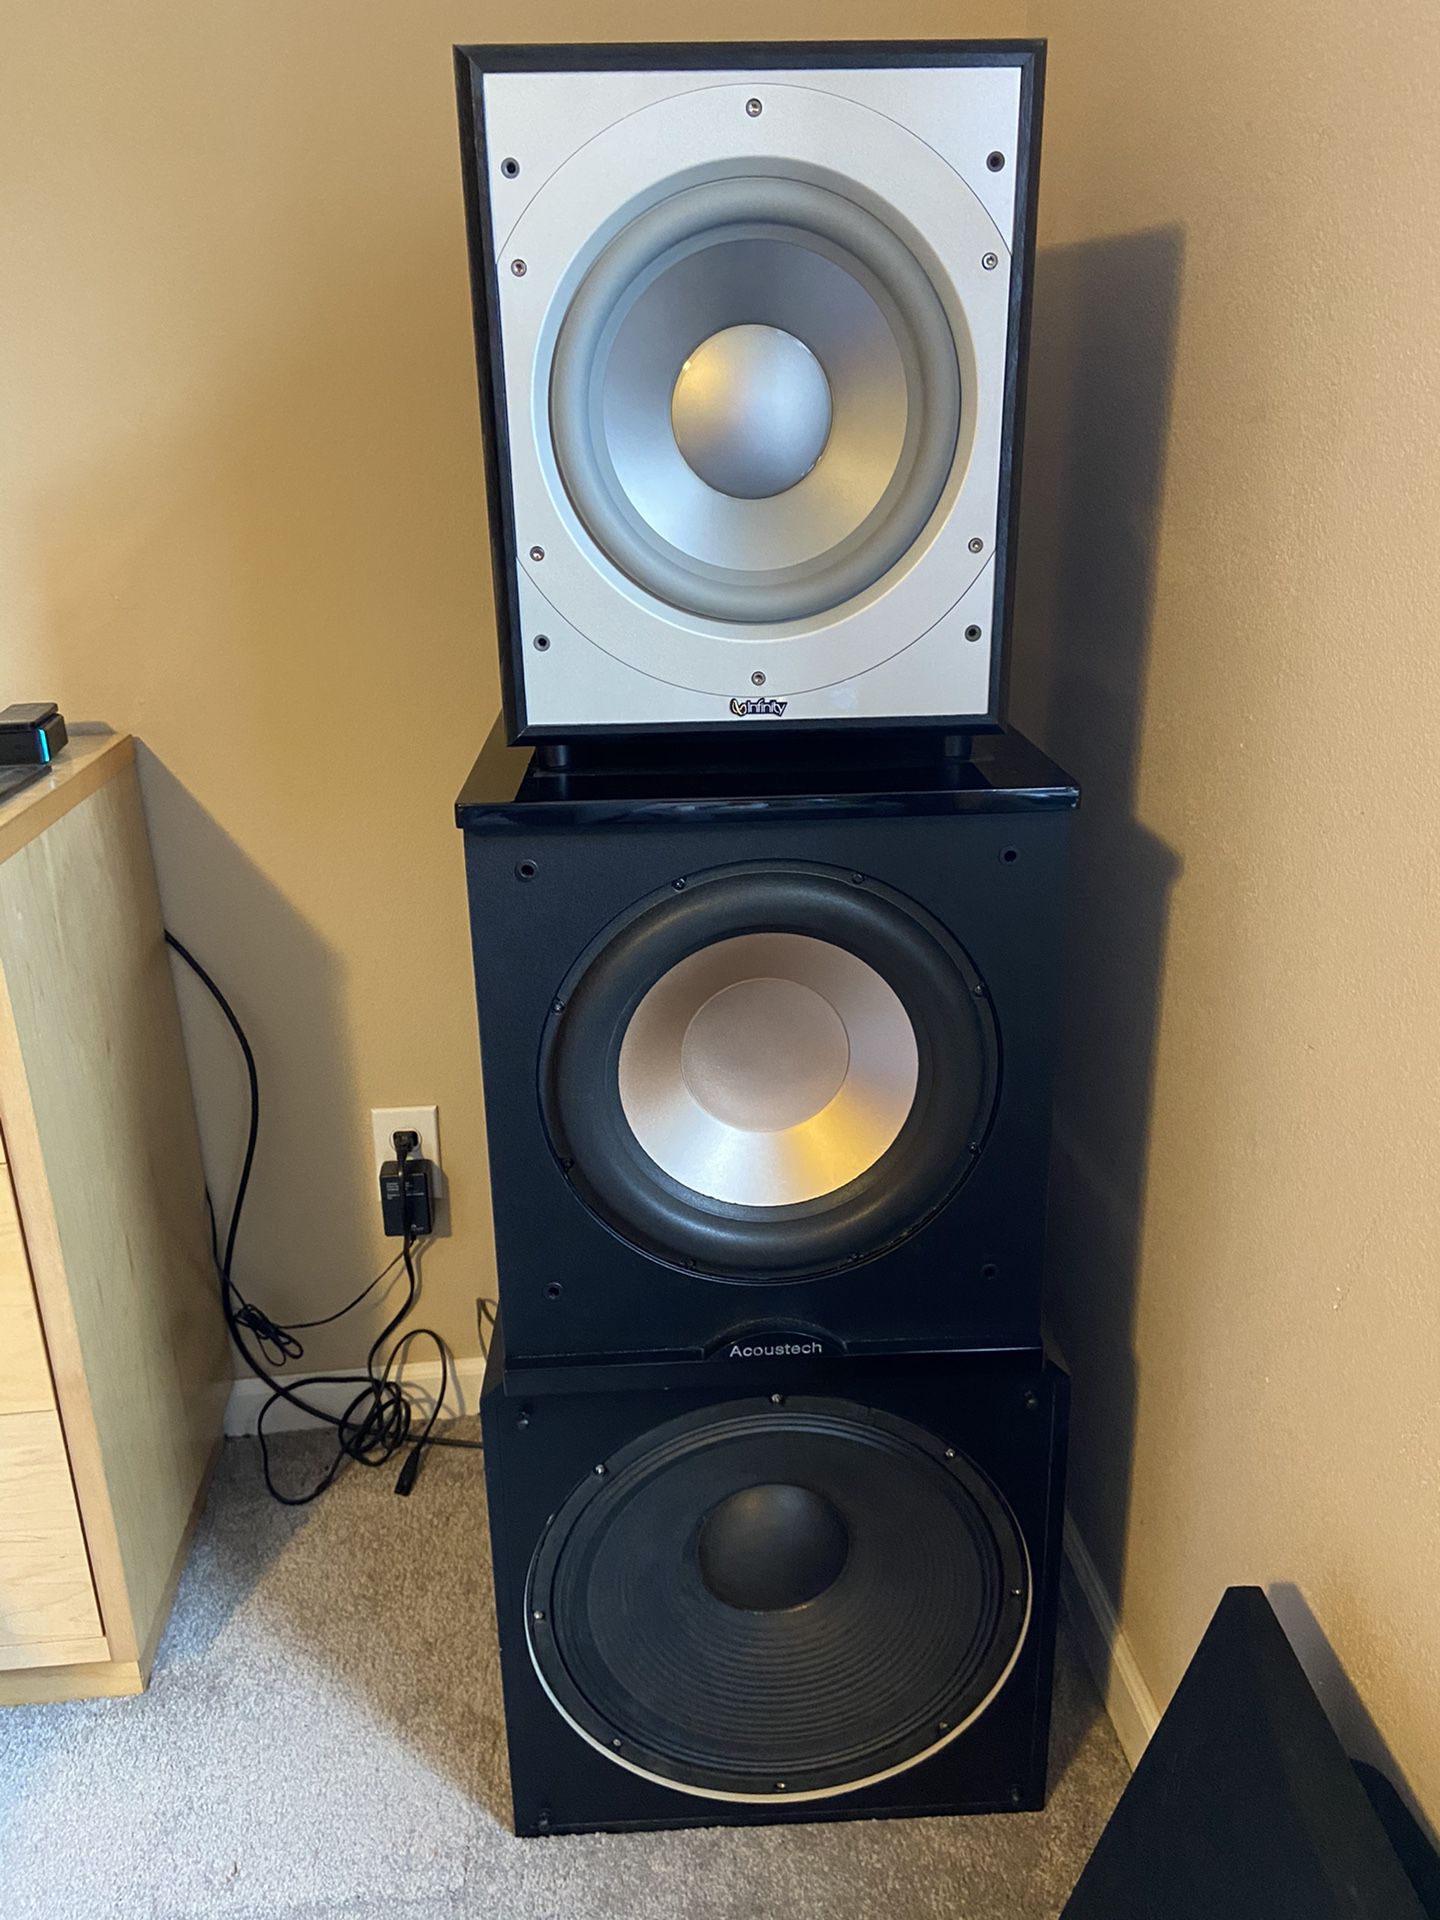 Subwoofers 10”,12” & 15” all 3 for $80